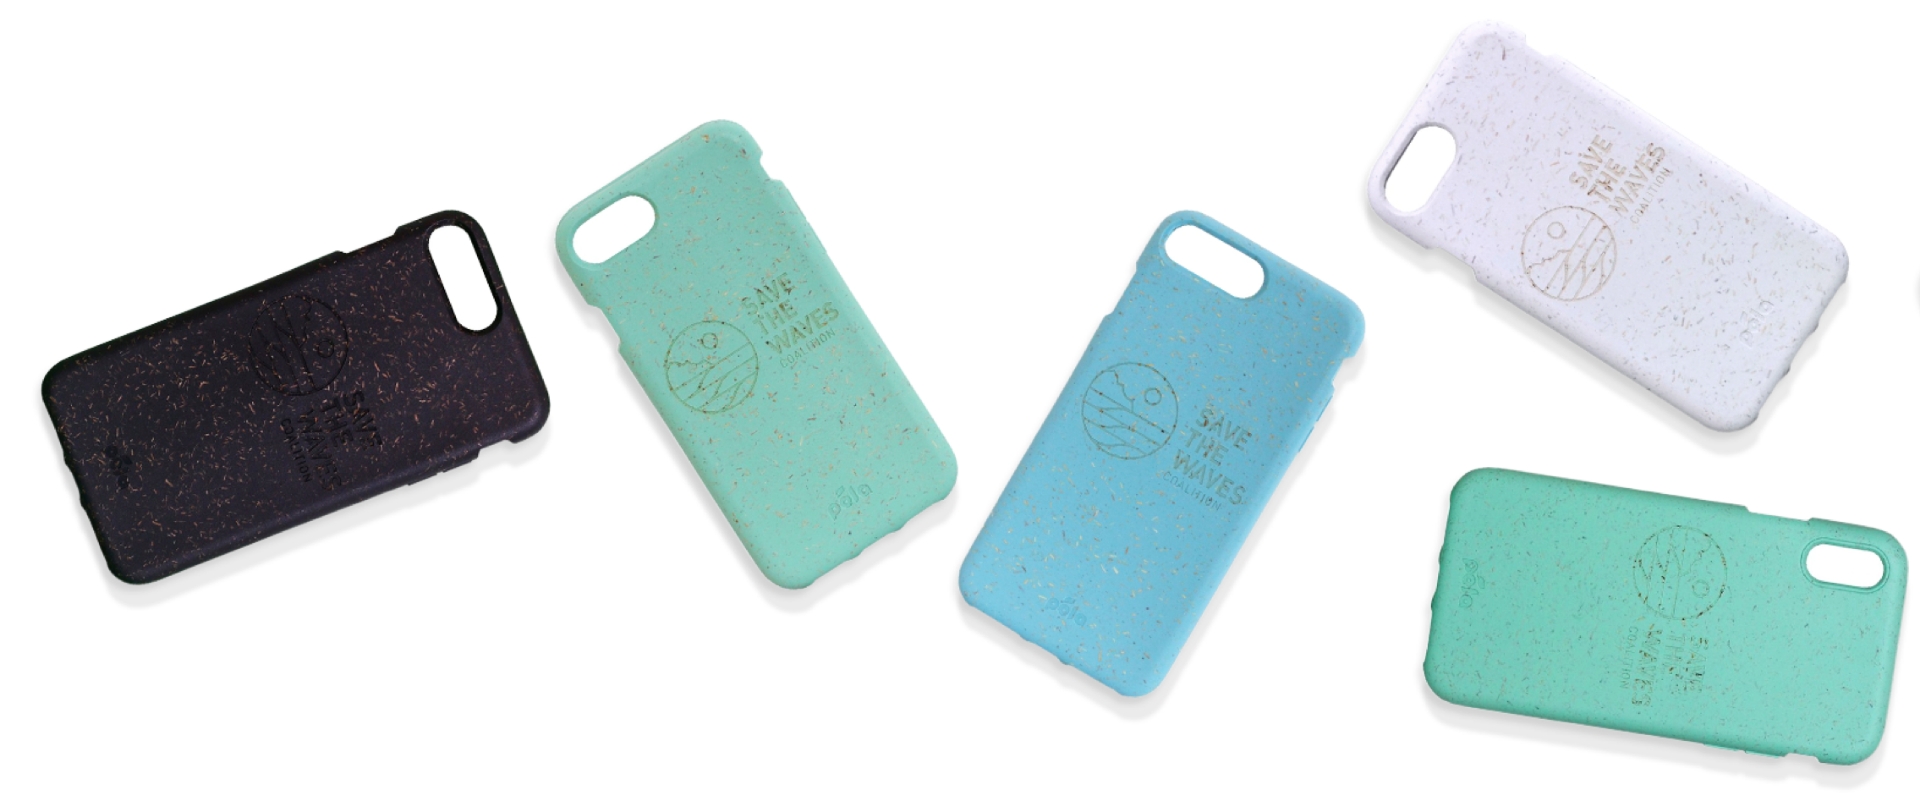 The Biodegradable Phone Case for People Who Care - 100% Biodegradable